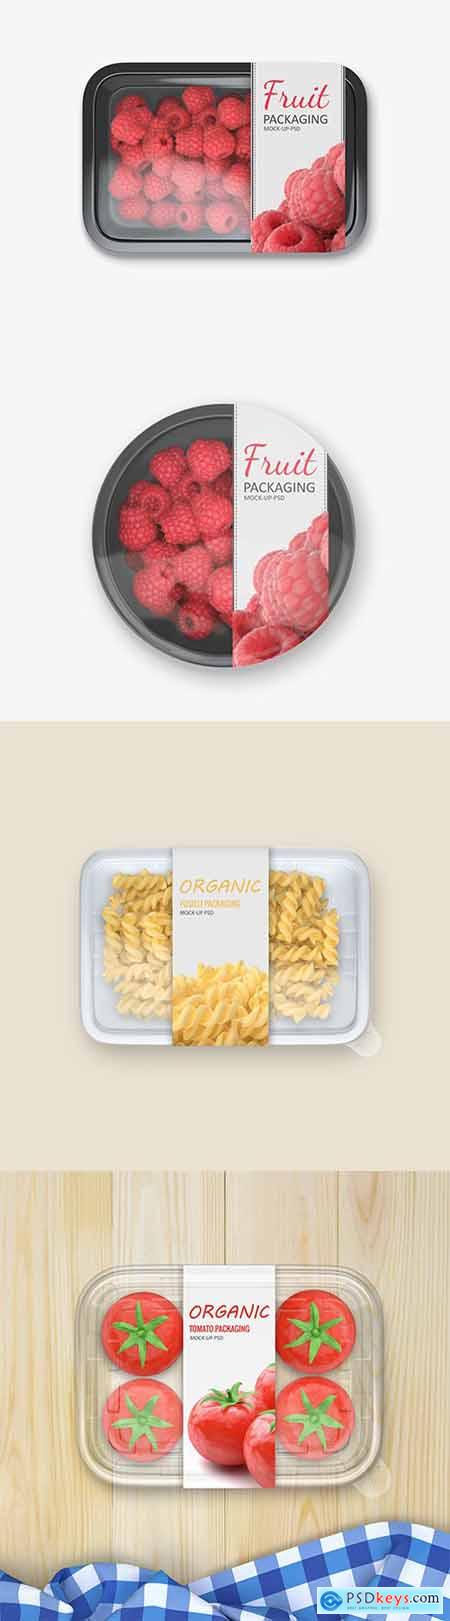 Plastic Food Container PSD Mock up Set